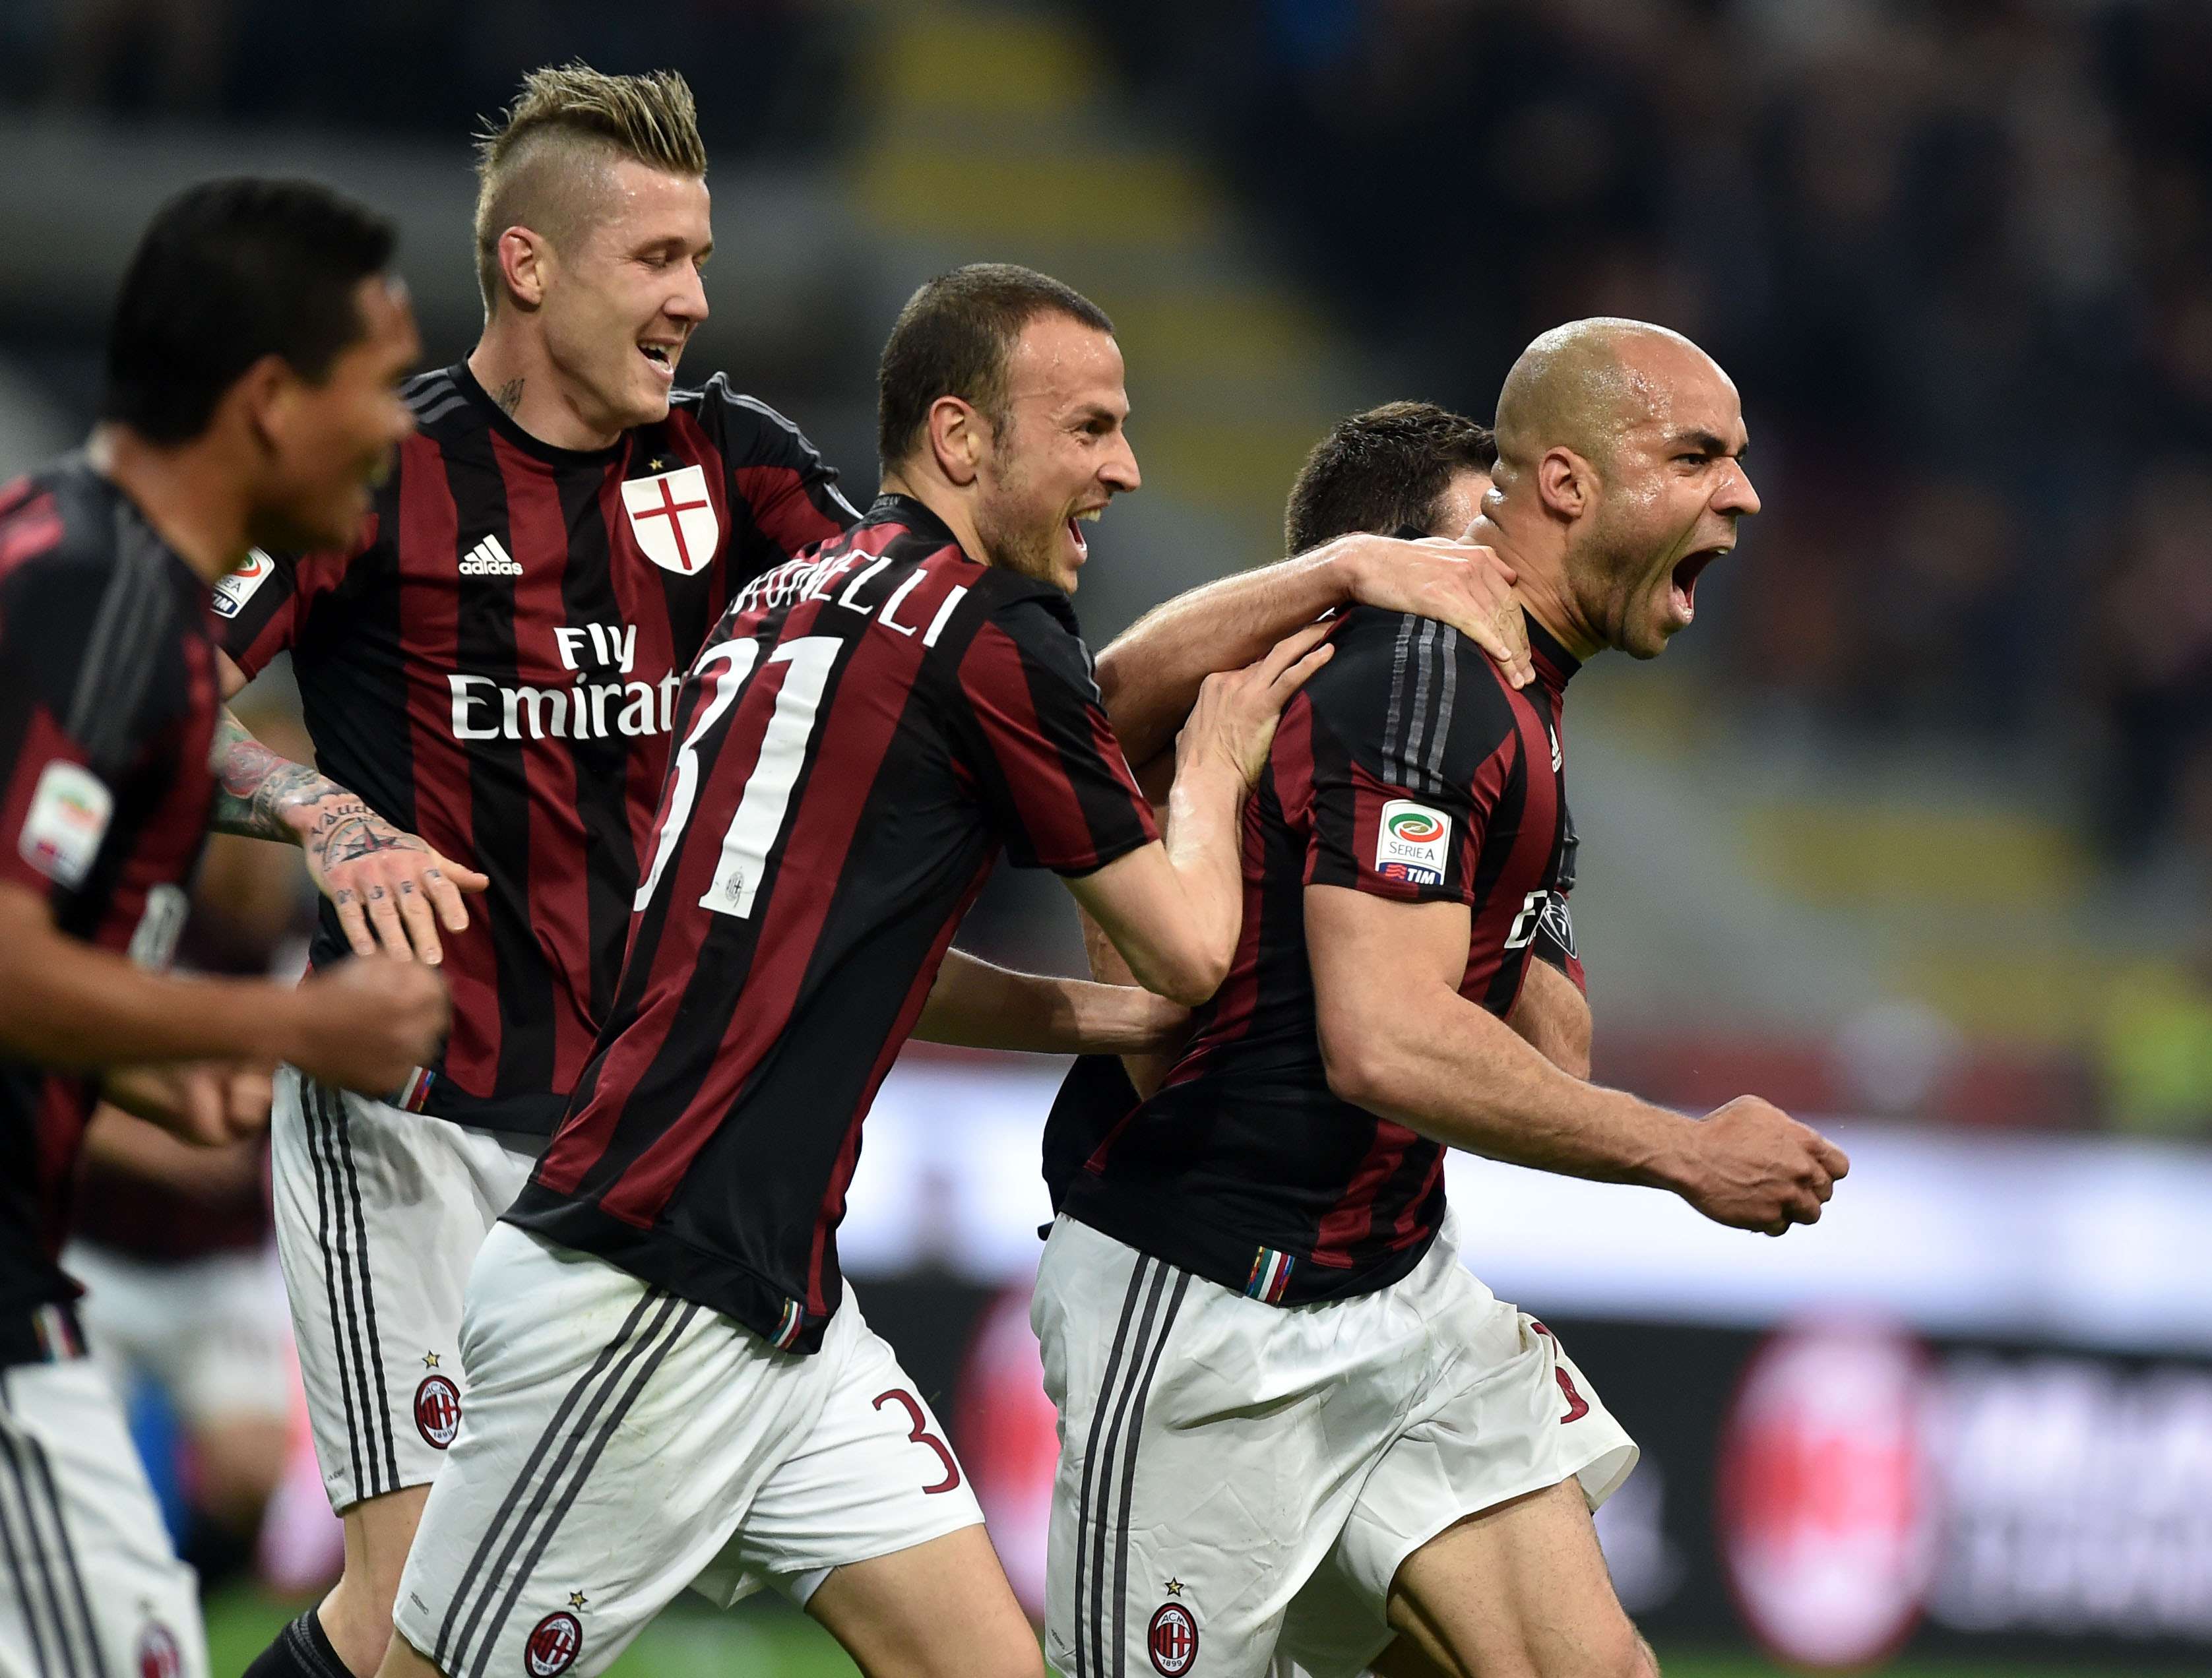 AC Milan have one of the proudest records in European club football, but have been on the decline for the last few years. Photo: Xinhua